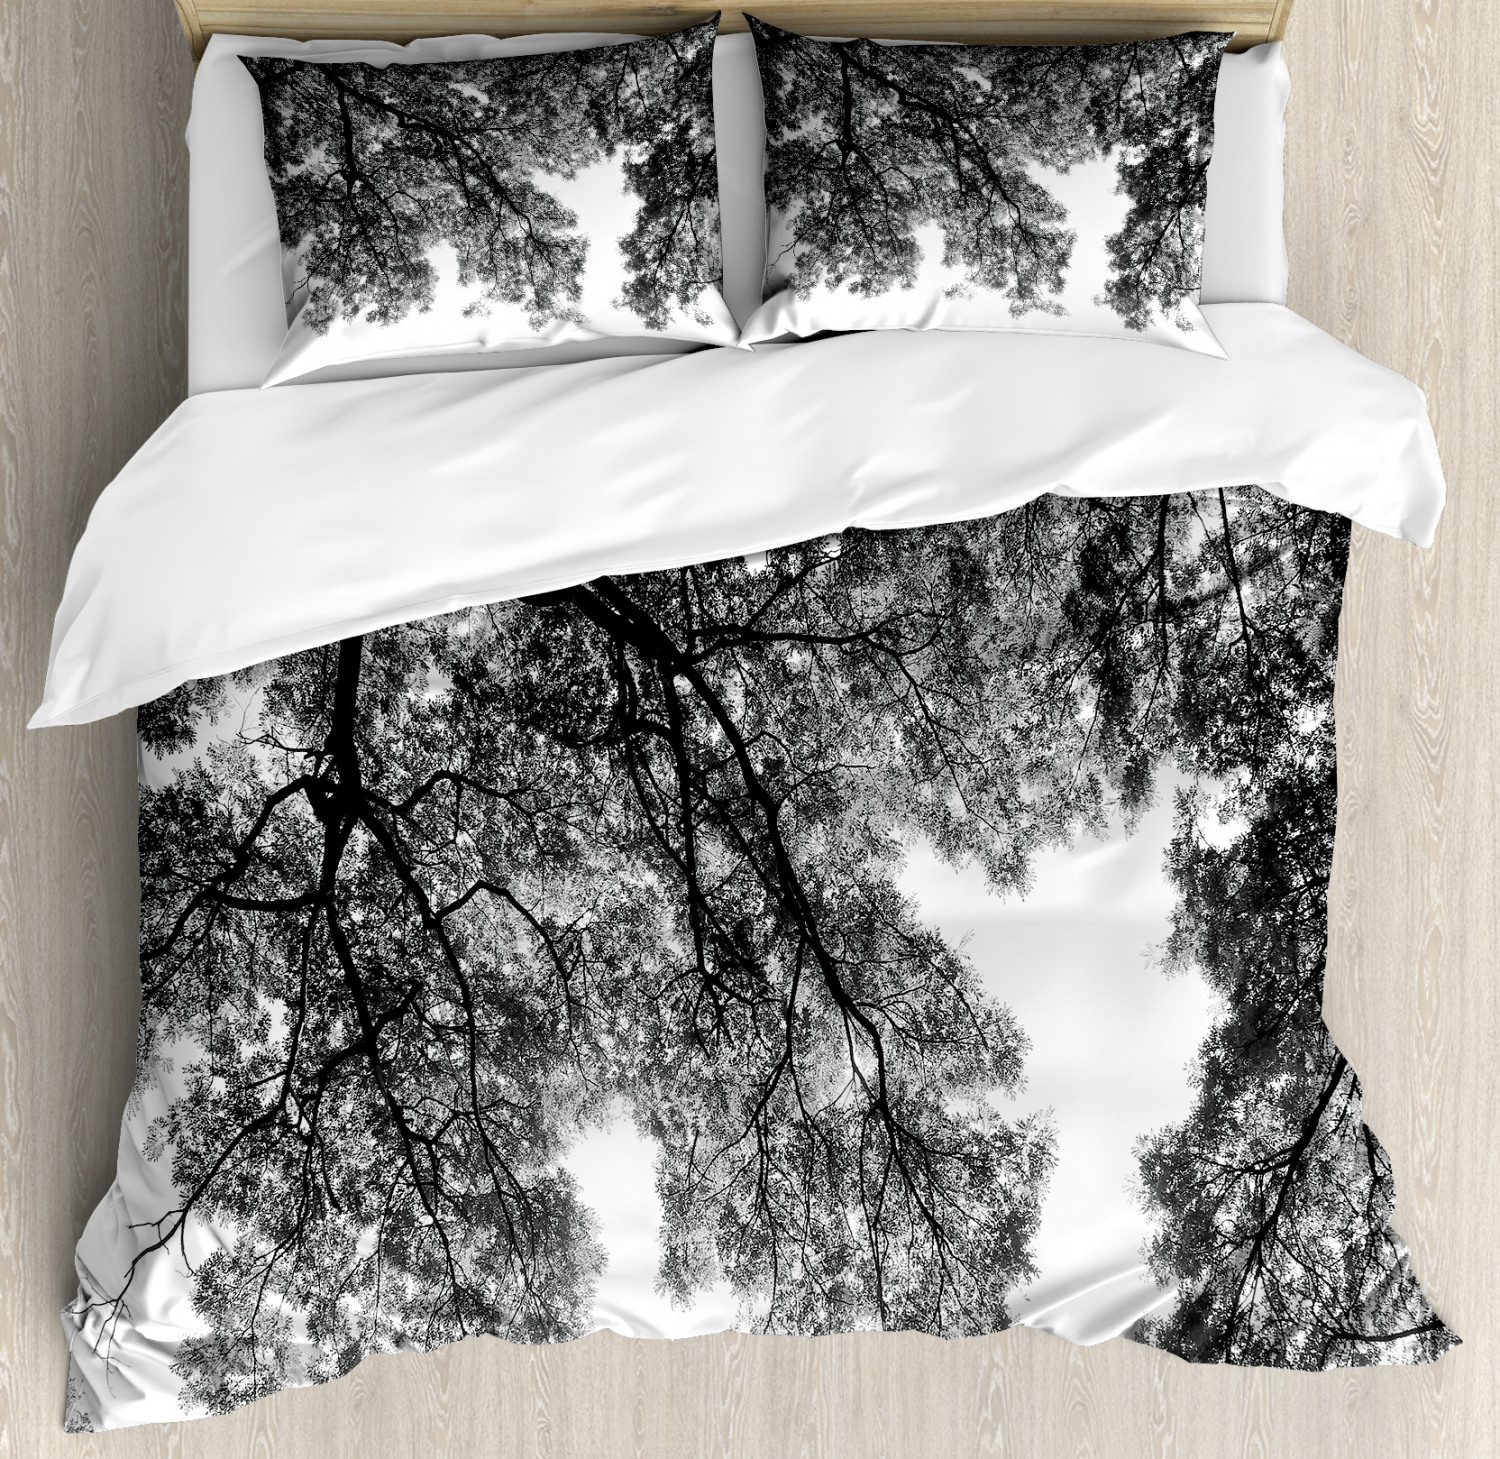 Photo Duvet Cover Set With Pillow Shams Tree Branches And Leaves